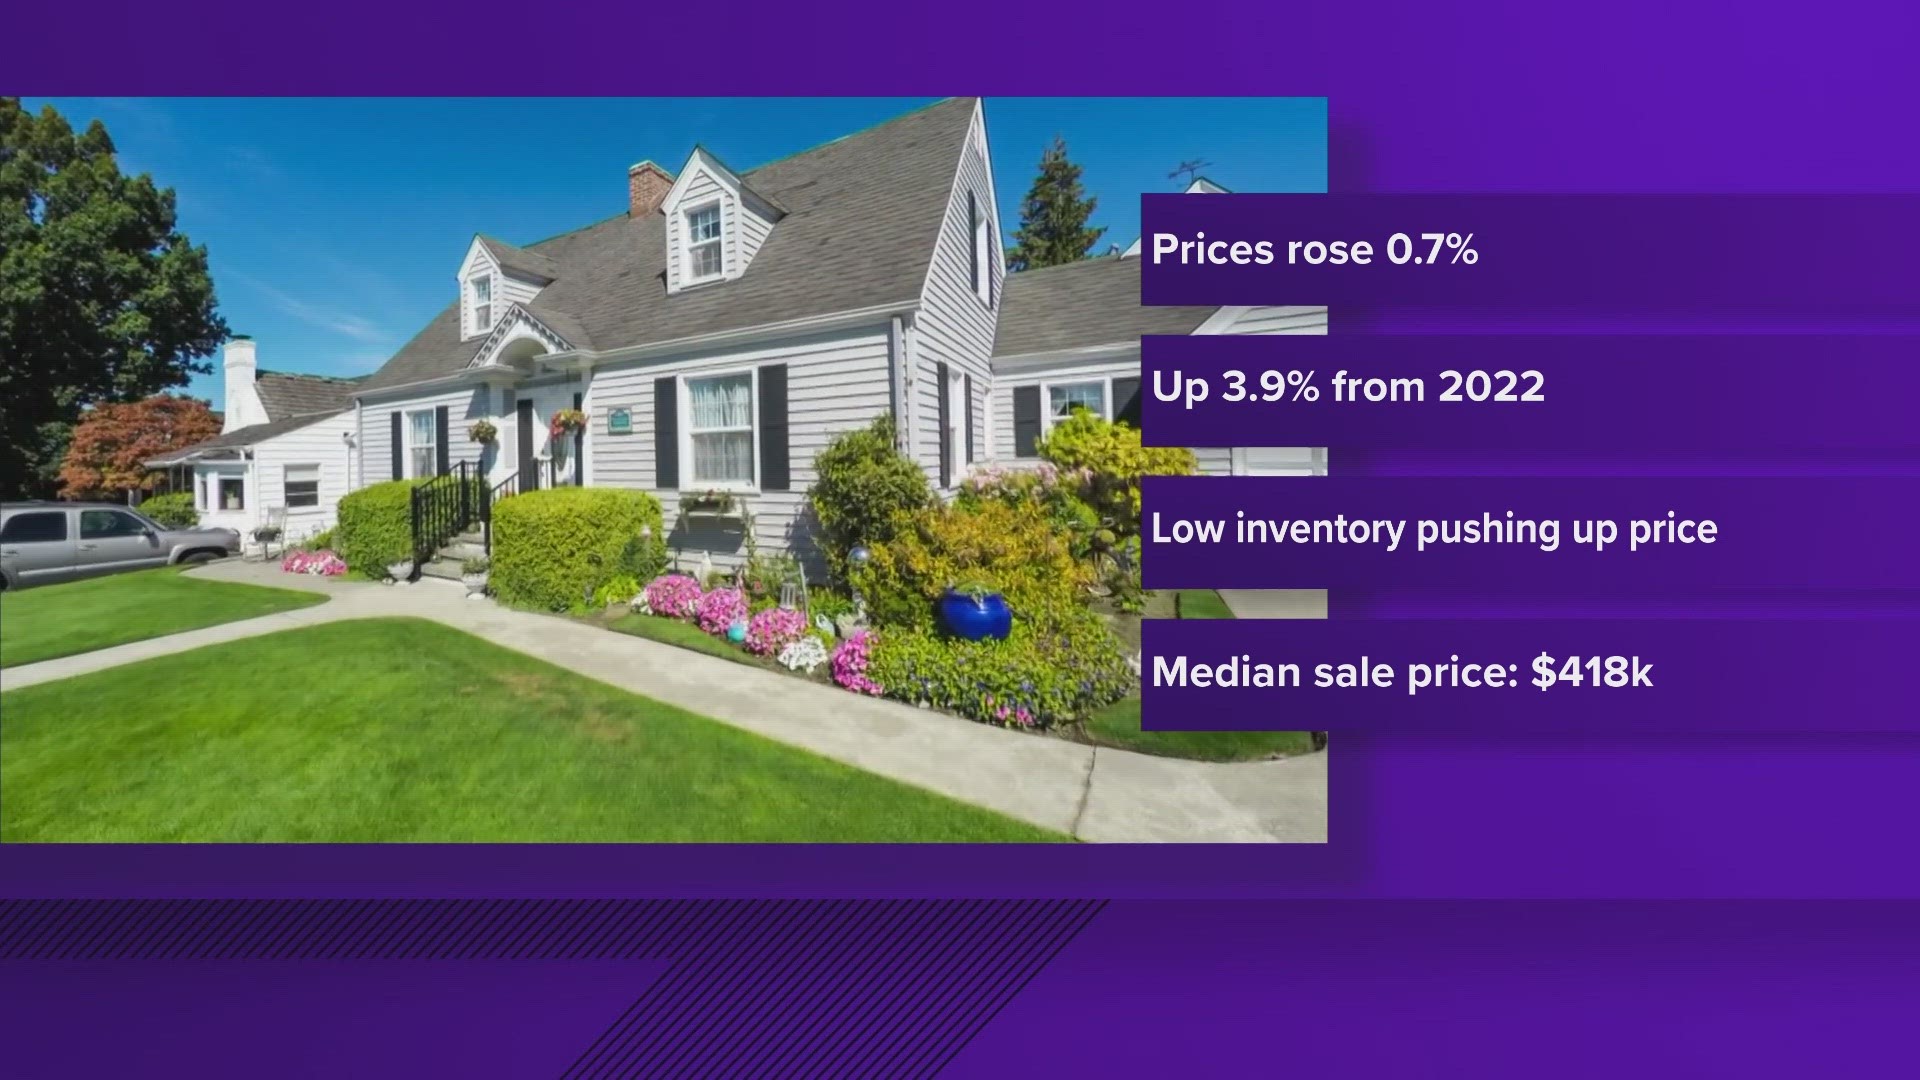 Prices hit a record high in September, increasing 0.7%.